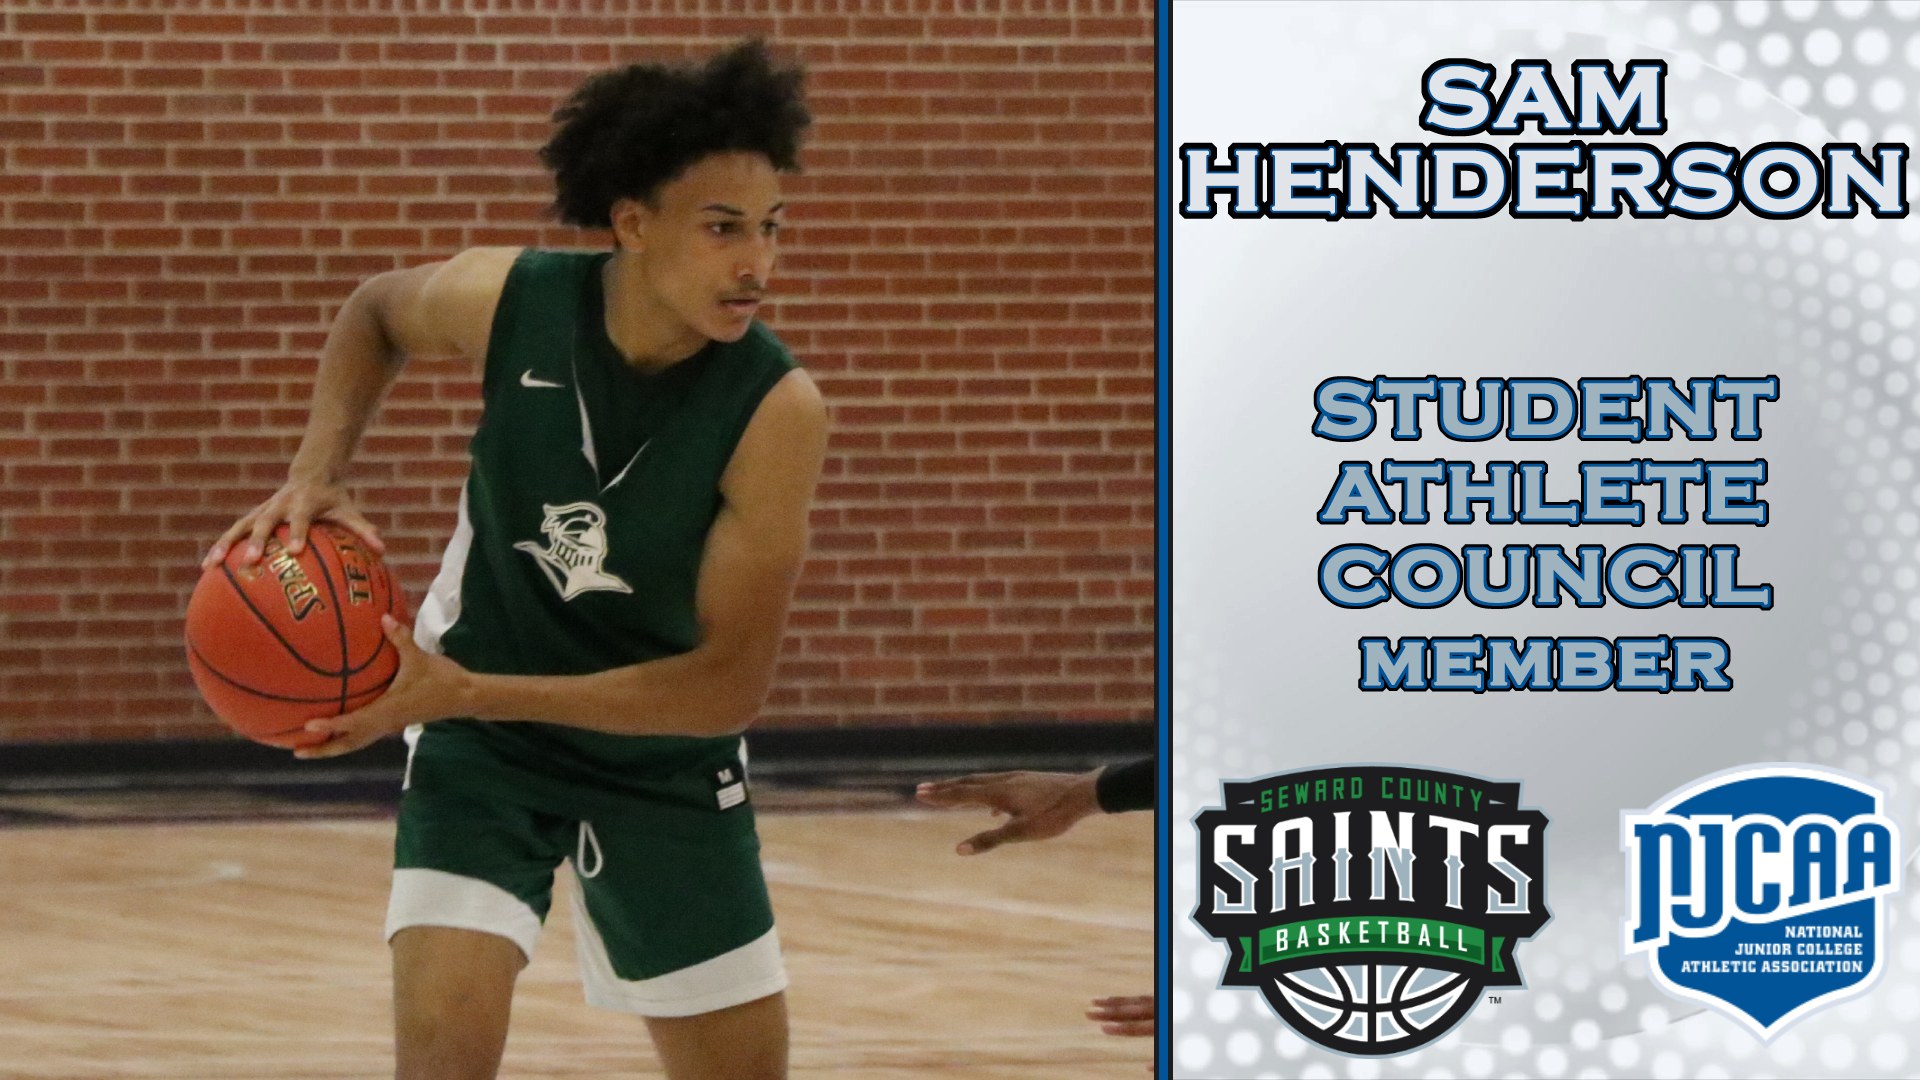 Henderson selected to join NJCAA Student-Athlete Council